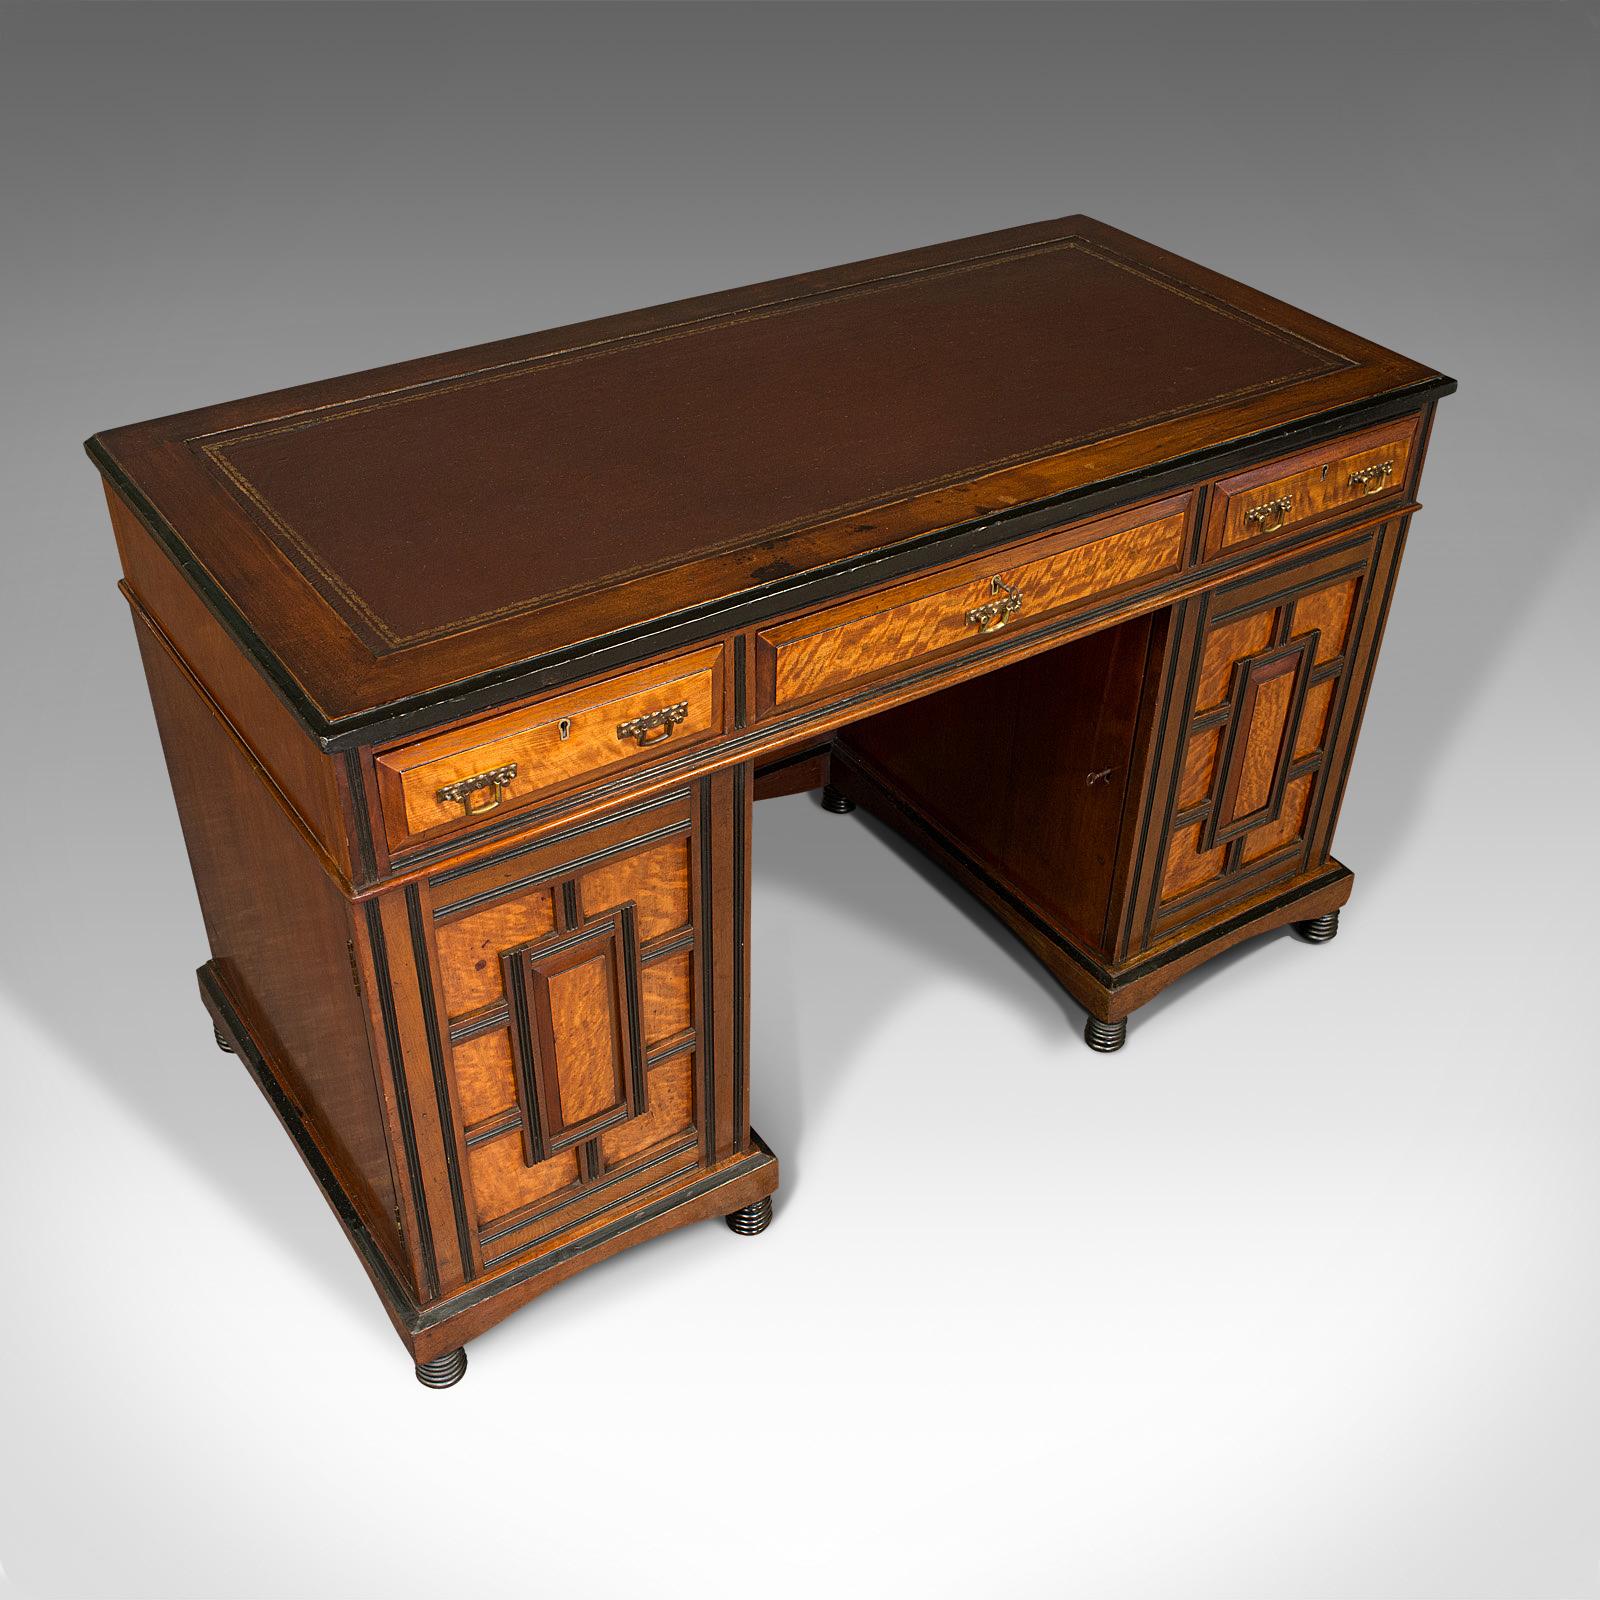 Walnut Antique Ladies Morning Room Desk, English, Writing Table, Aesthetic Period, 1880